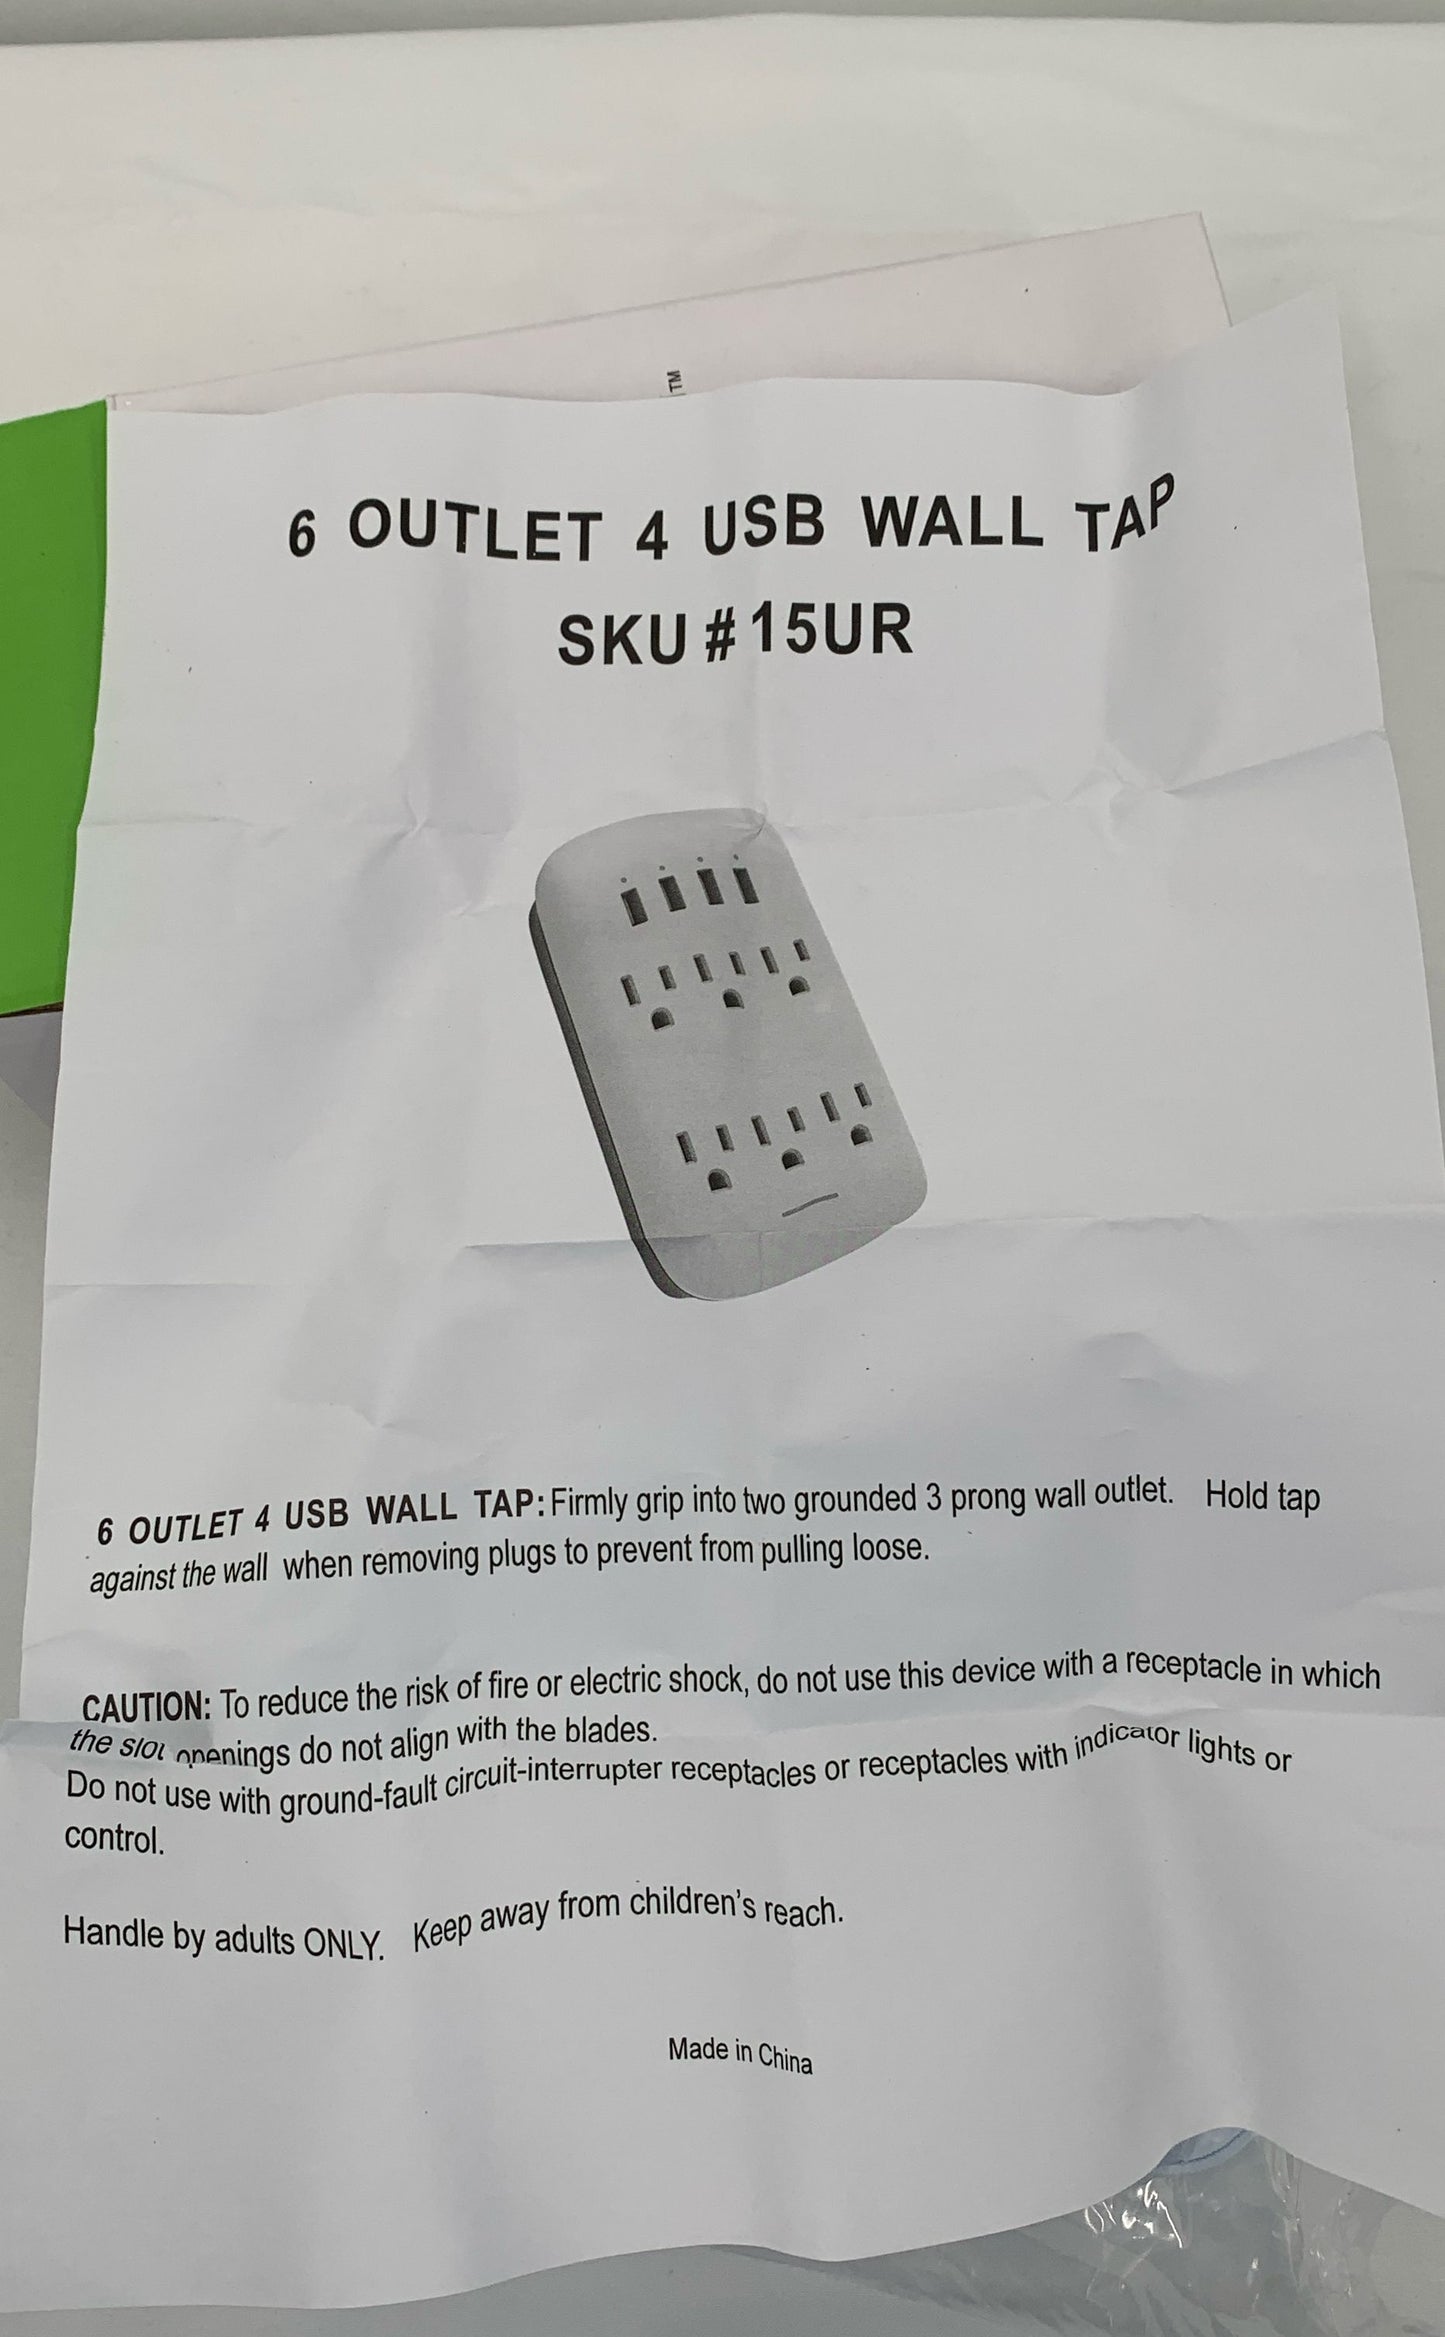 @ Design Litesun 6 Outlet 4 Usb Wall Tap With Surge Protector New In Box